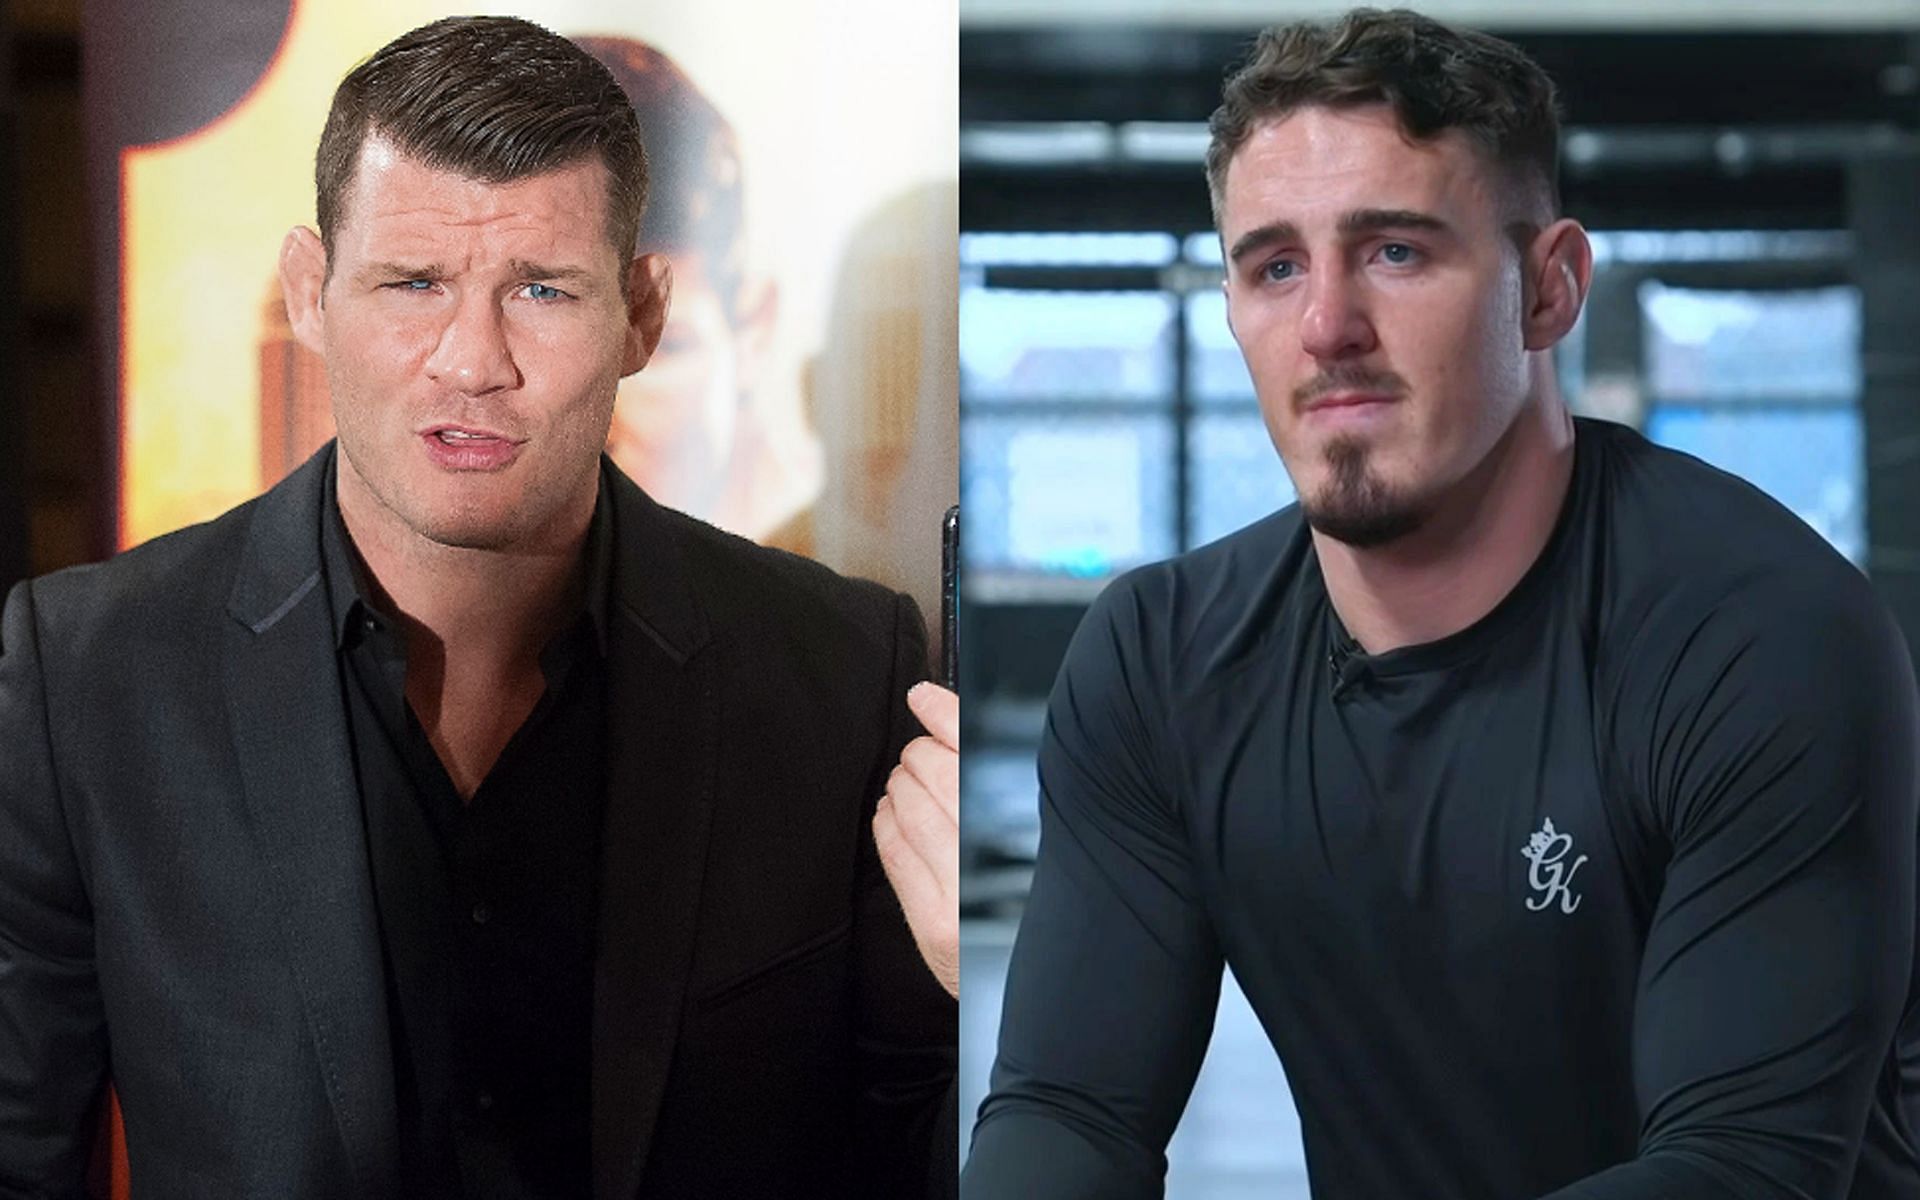 Michael Bisping (left) and Tom Aspinall (right) (Image via Getty / YouTube - BT Sport)